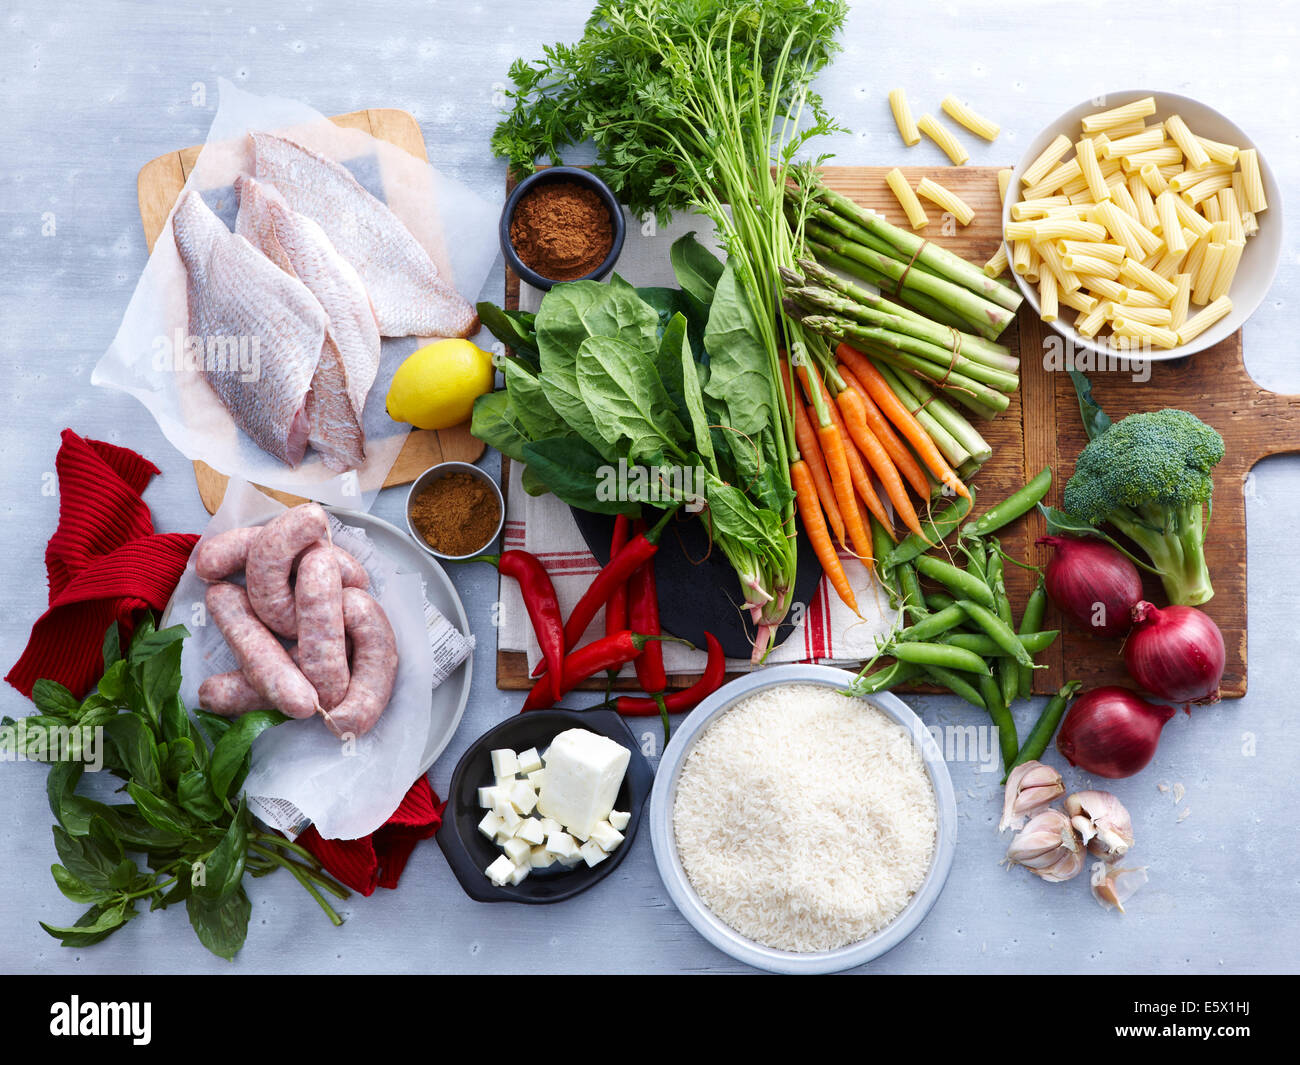 Overhead view of fish, pork sausage, feta and selection of fresh organic herbs and vegetable Stock Photo